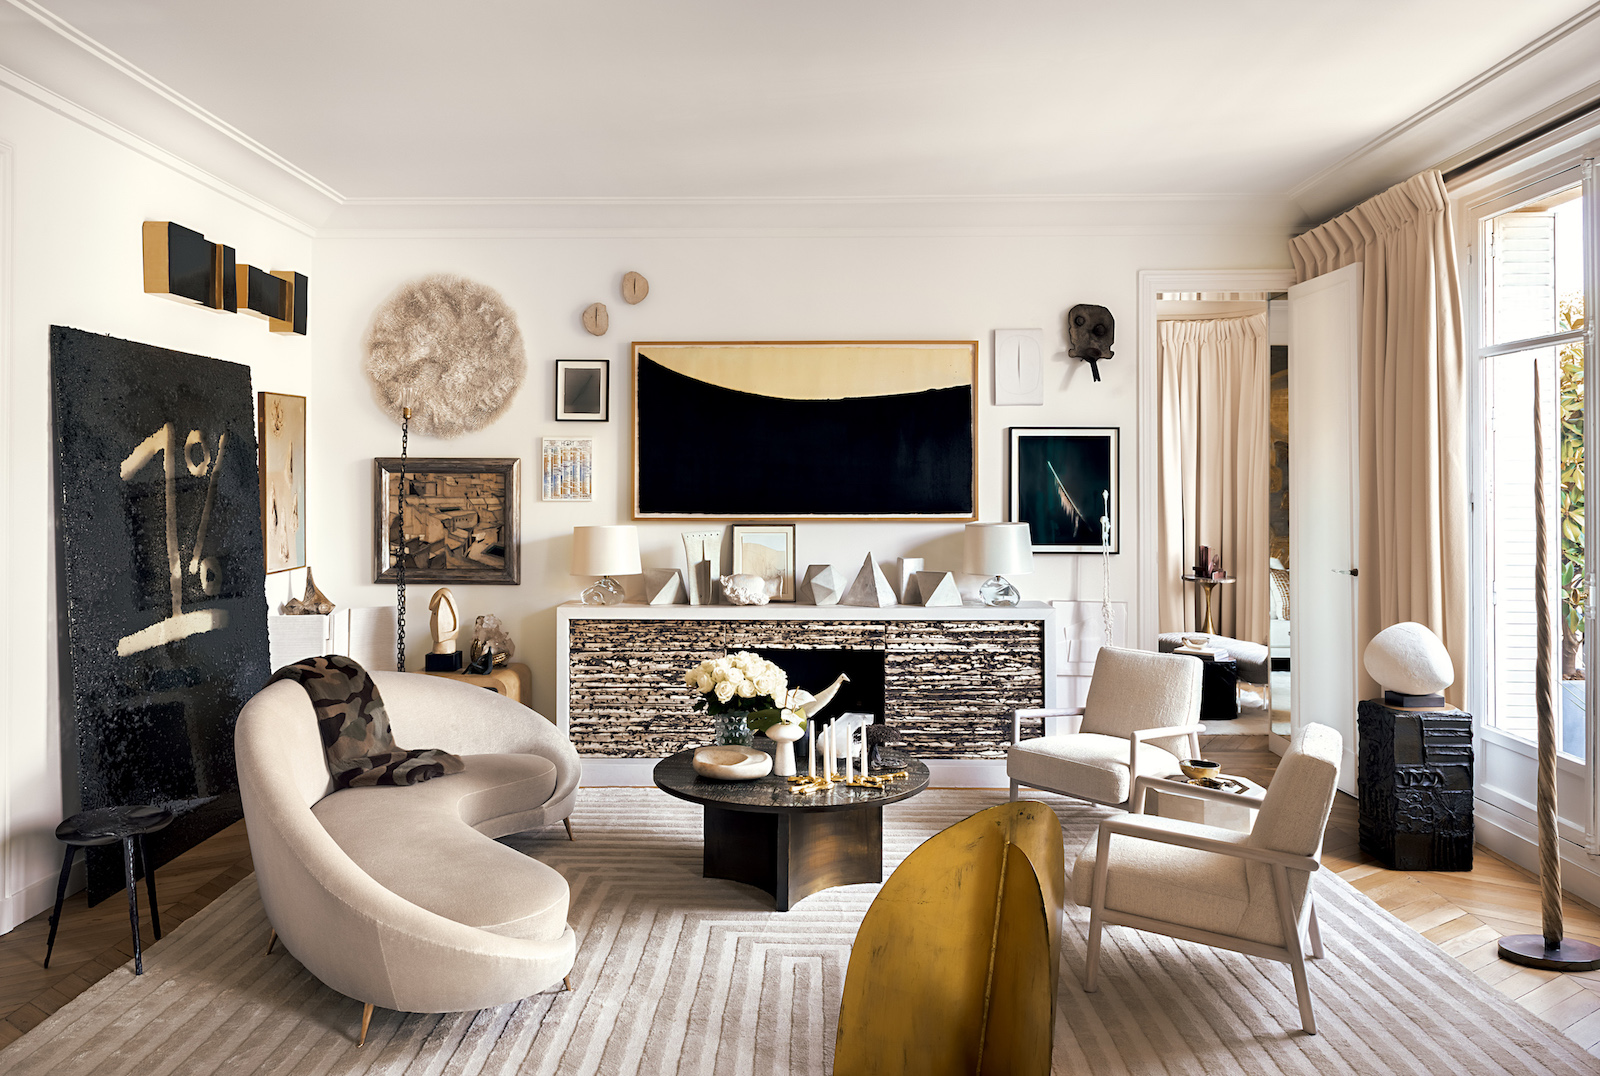 The New Chic French Style from Today’s Leading Interior